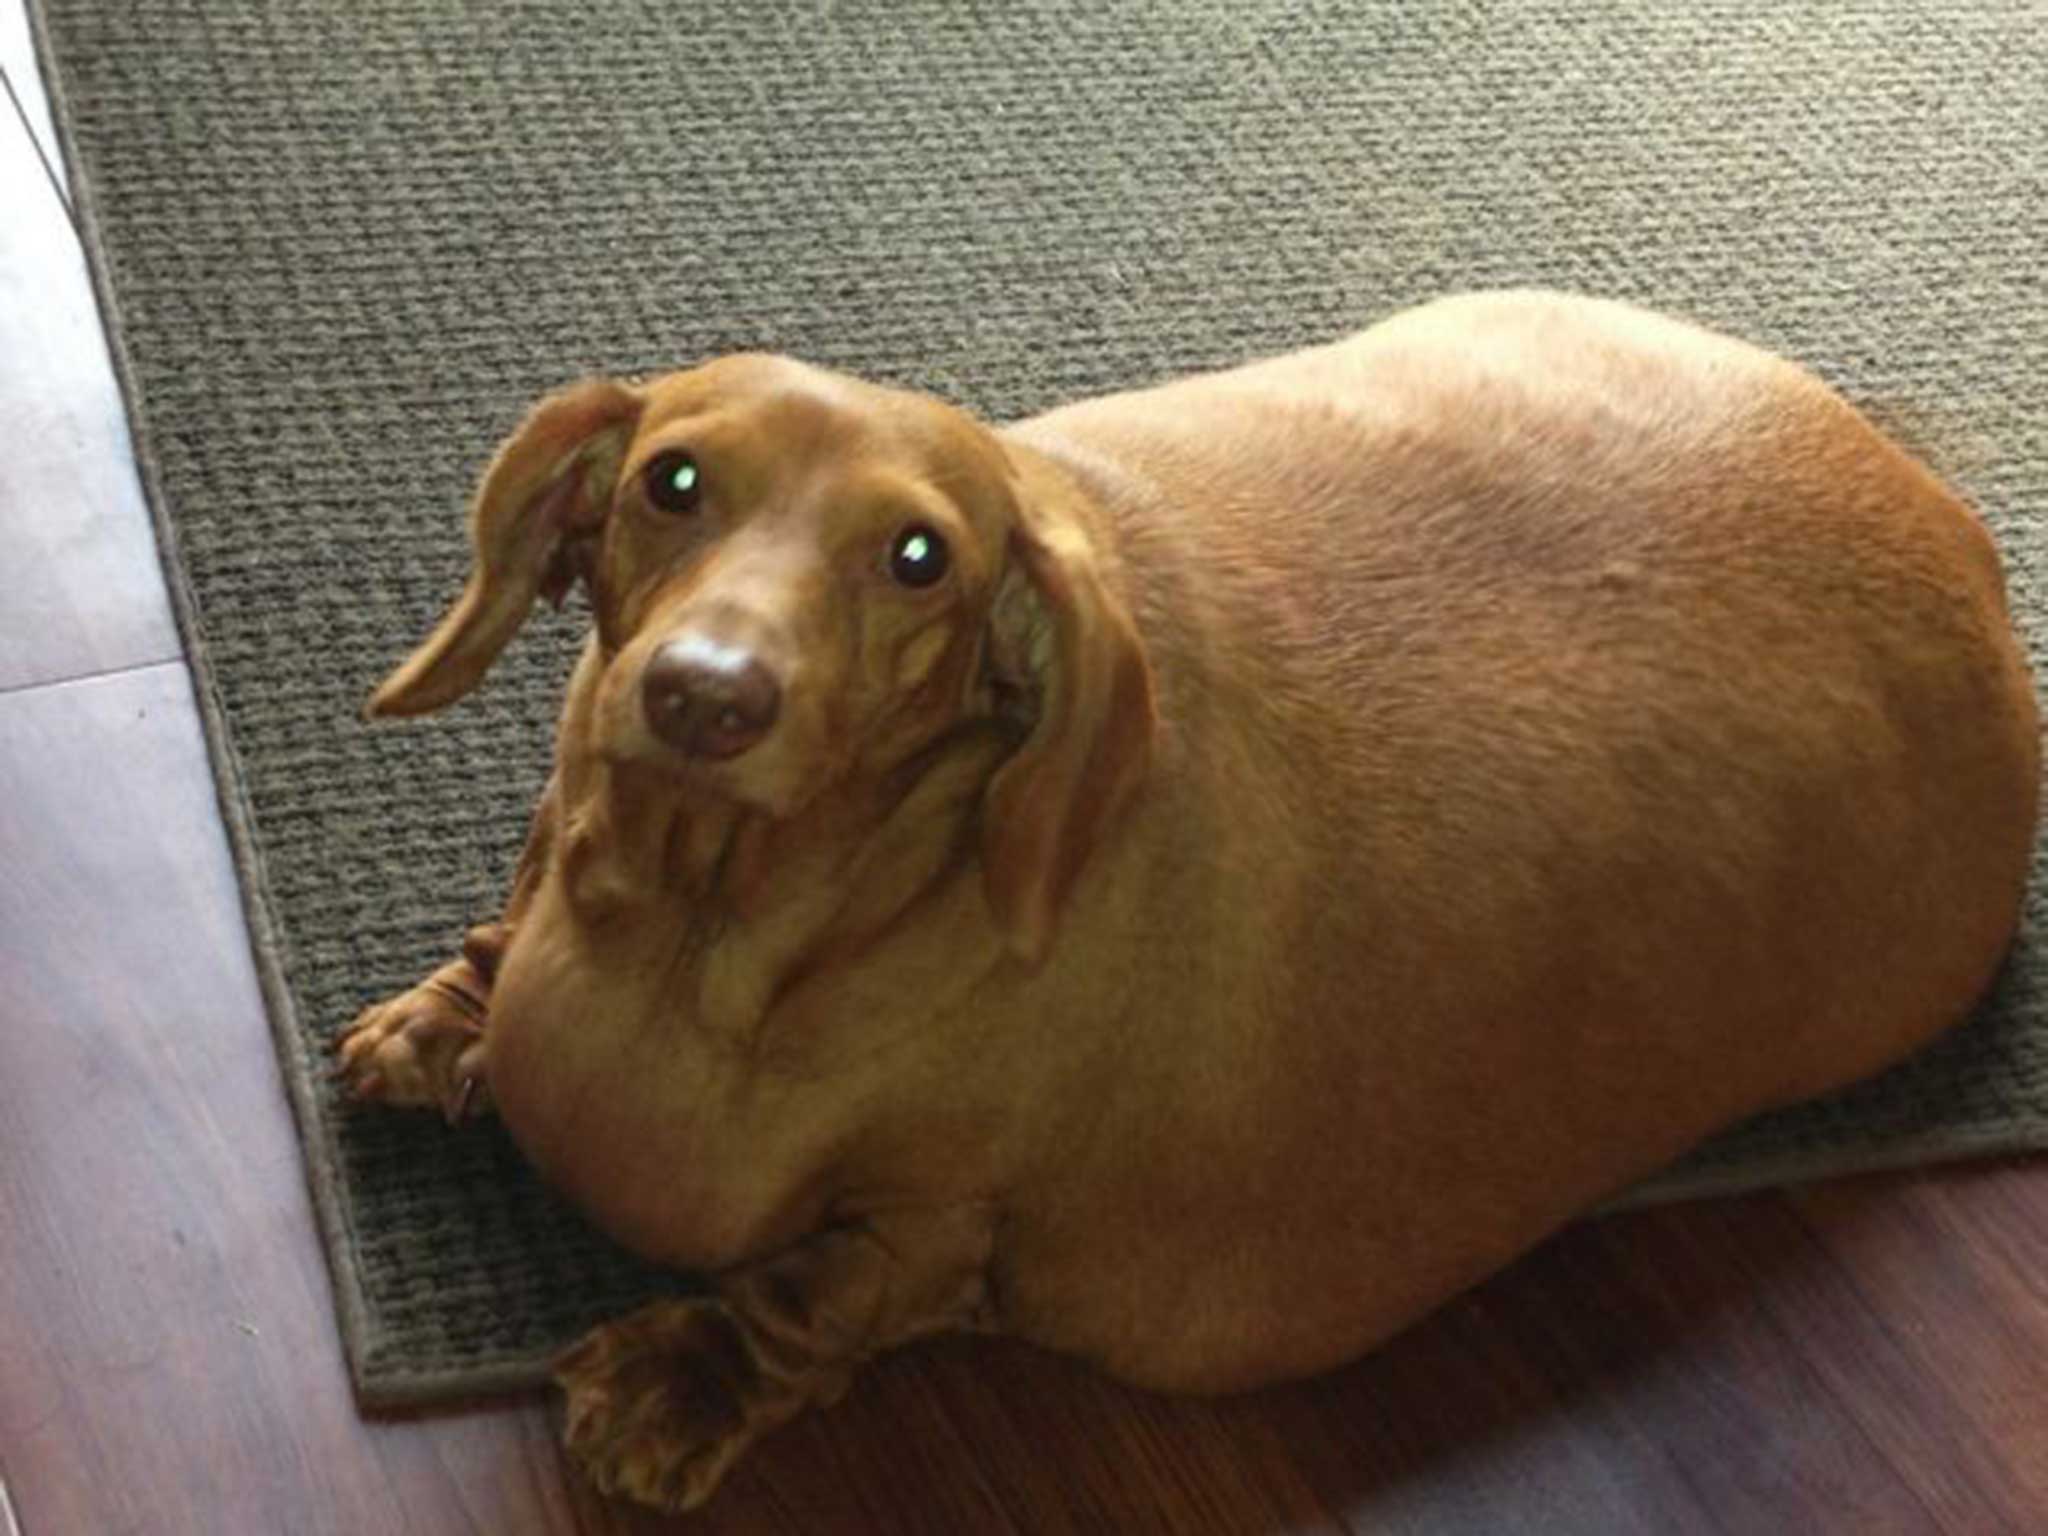 Dennis weighed the equivalent of four to five other dachshunds combined